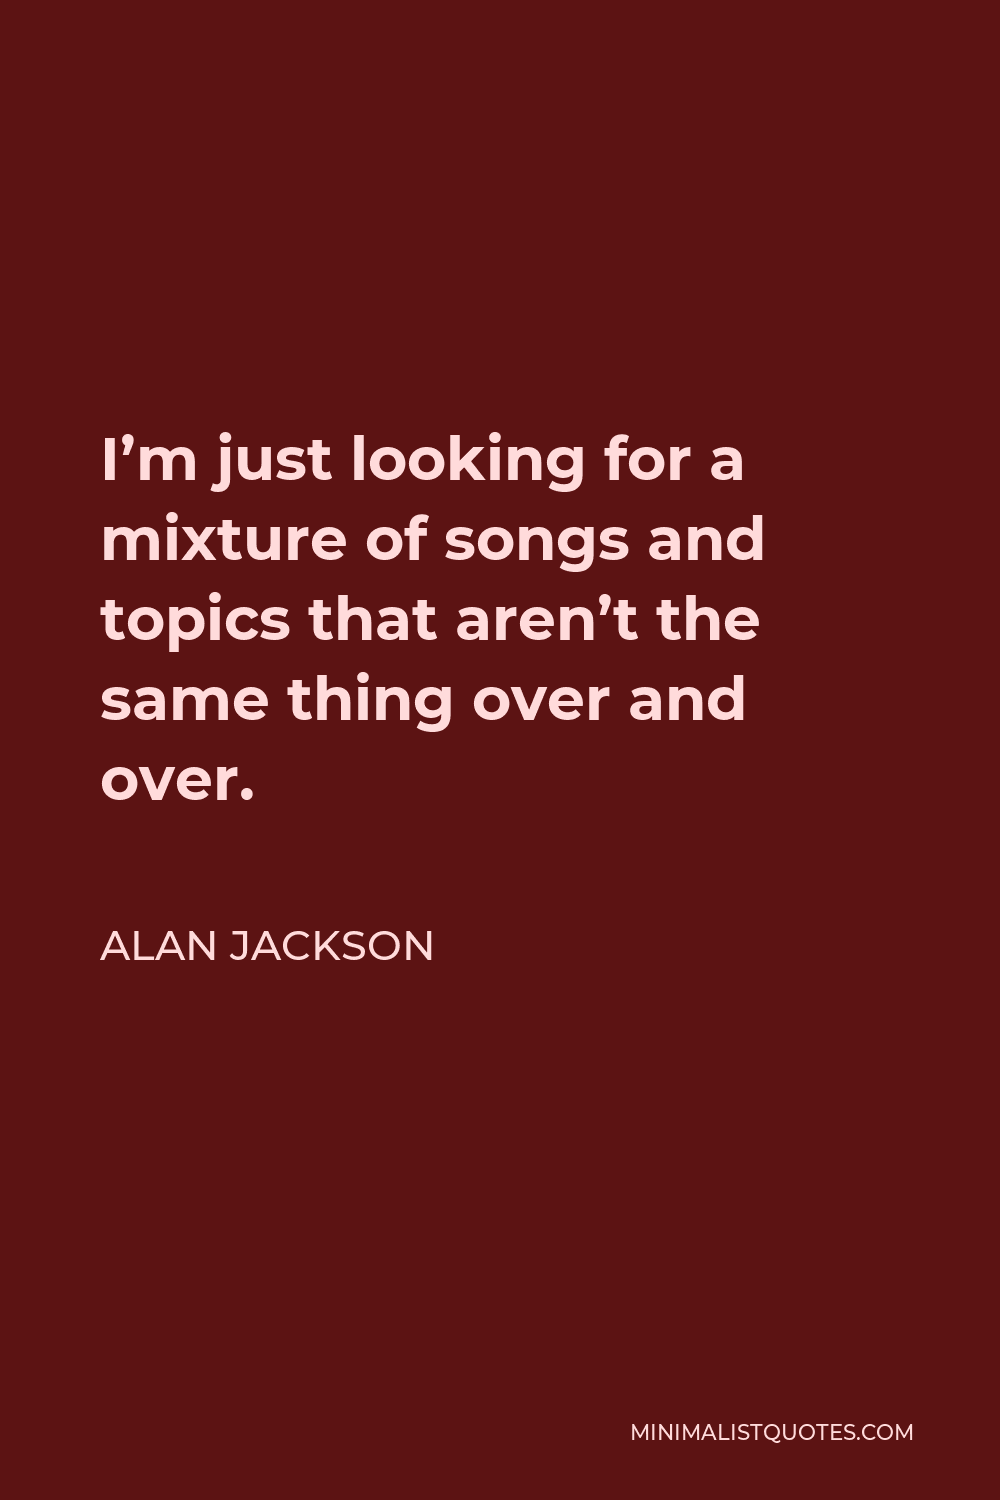 Alan Jackson Quote - I’m just looking for a mixture of songs and topics that aren’t the same thing over and over.